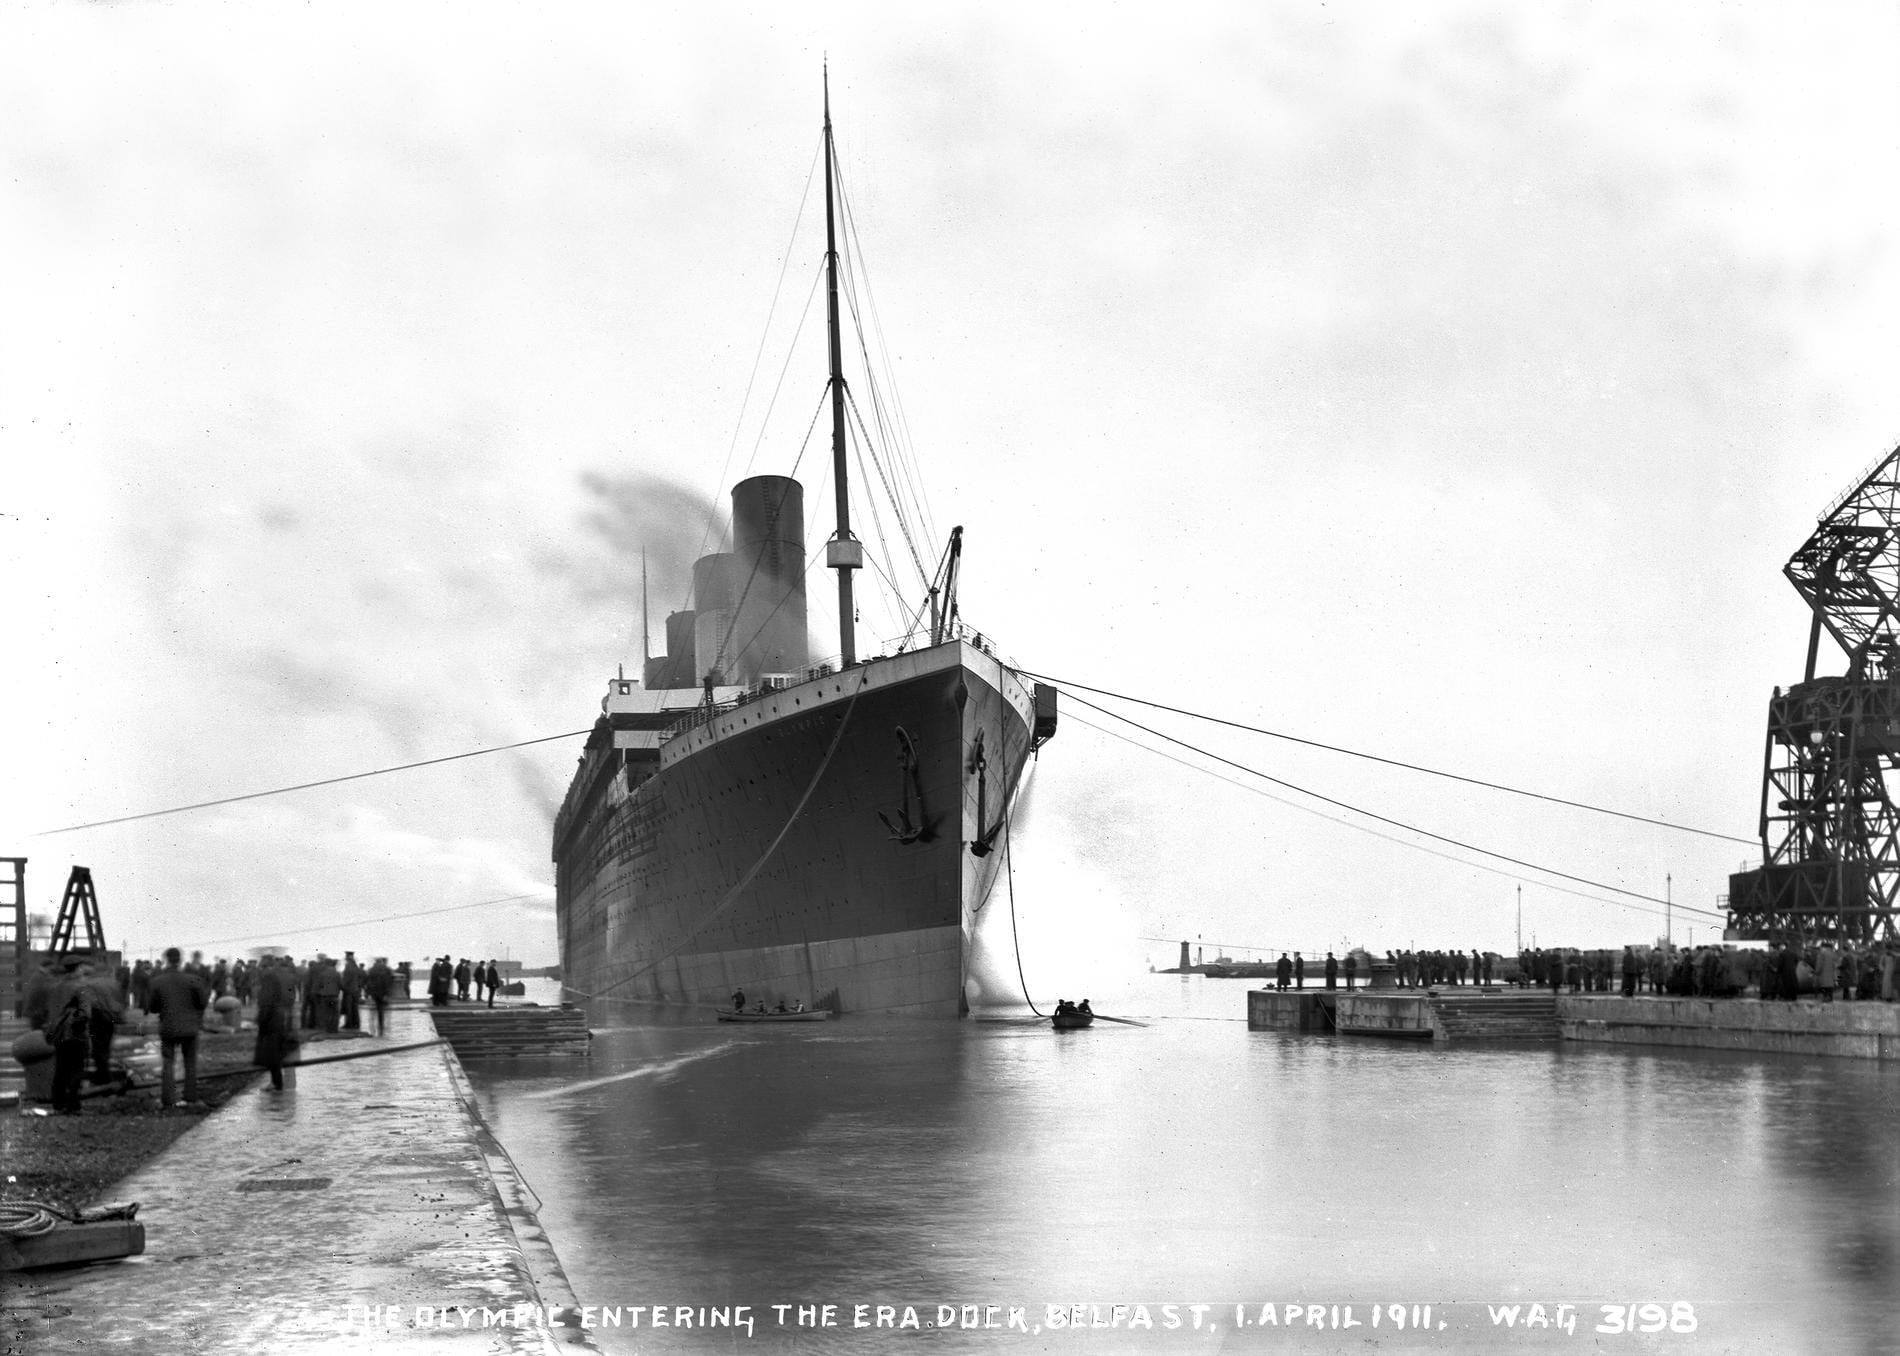 The Nantucket Lightship Collision with the RMS Olympic in